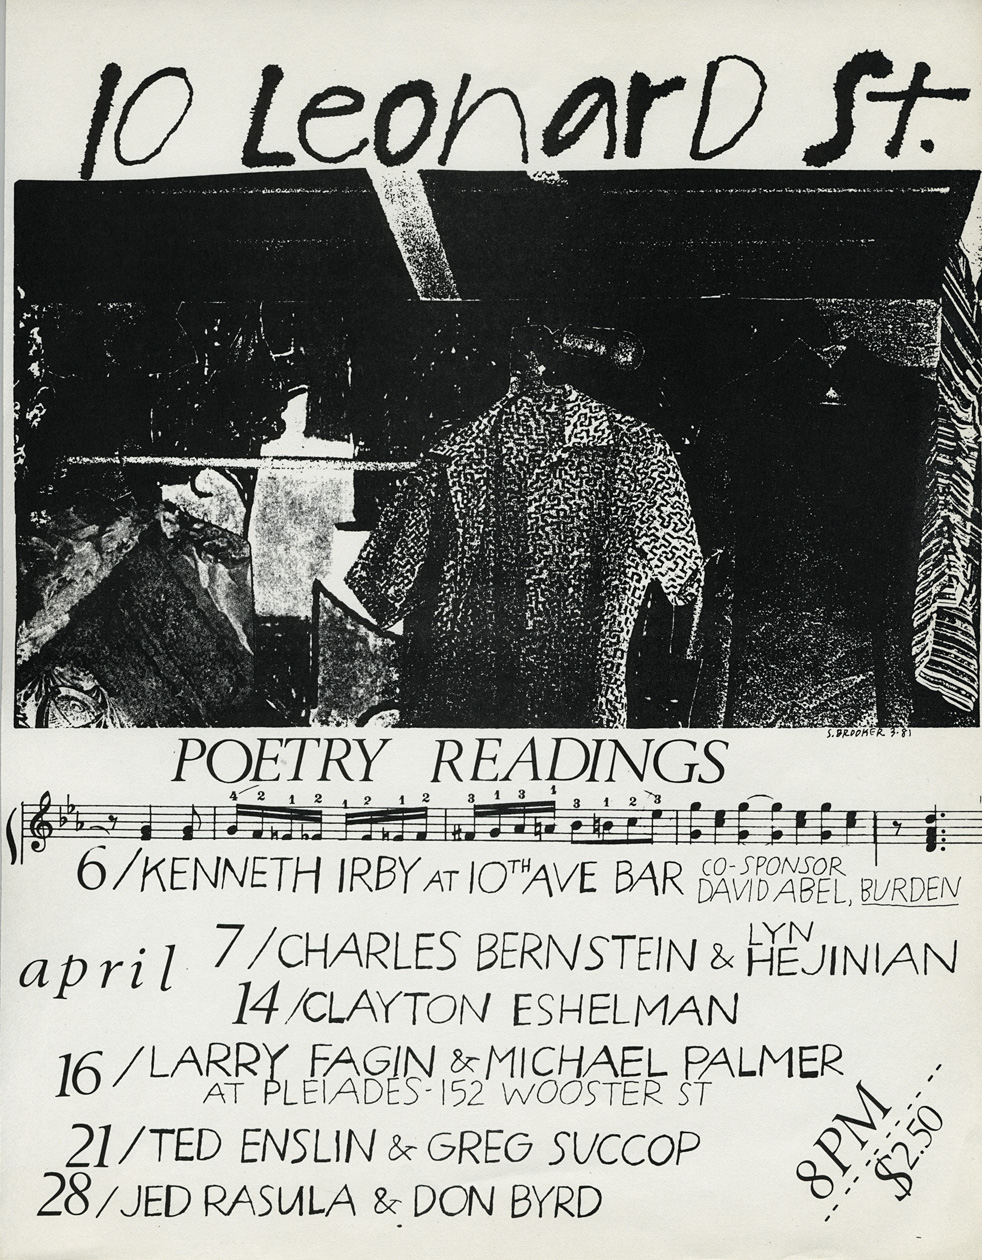 Flyer with the April 1981 calendar of poetry readings at 10 Leonard St., New York city with Kenneth Irby, Charles Bernstein, Lyn Hejinian, Clayton Eshleman, Larry Fagin, Michael Palmer, Ted Enslin, Greg Succop, Jed Rasula, and Don Byrd. 8 1/2 x 11 inches.